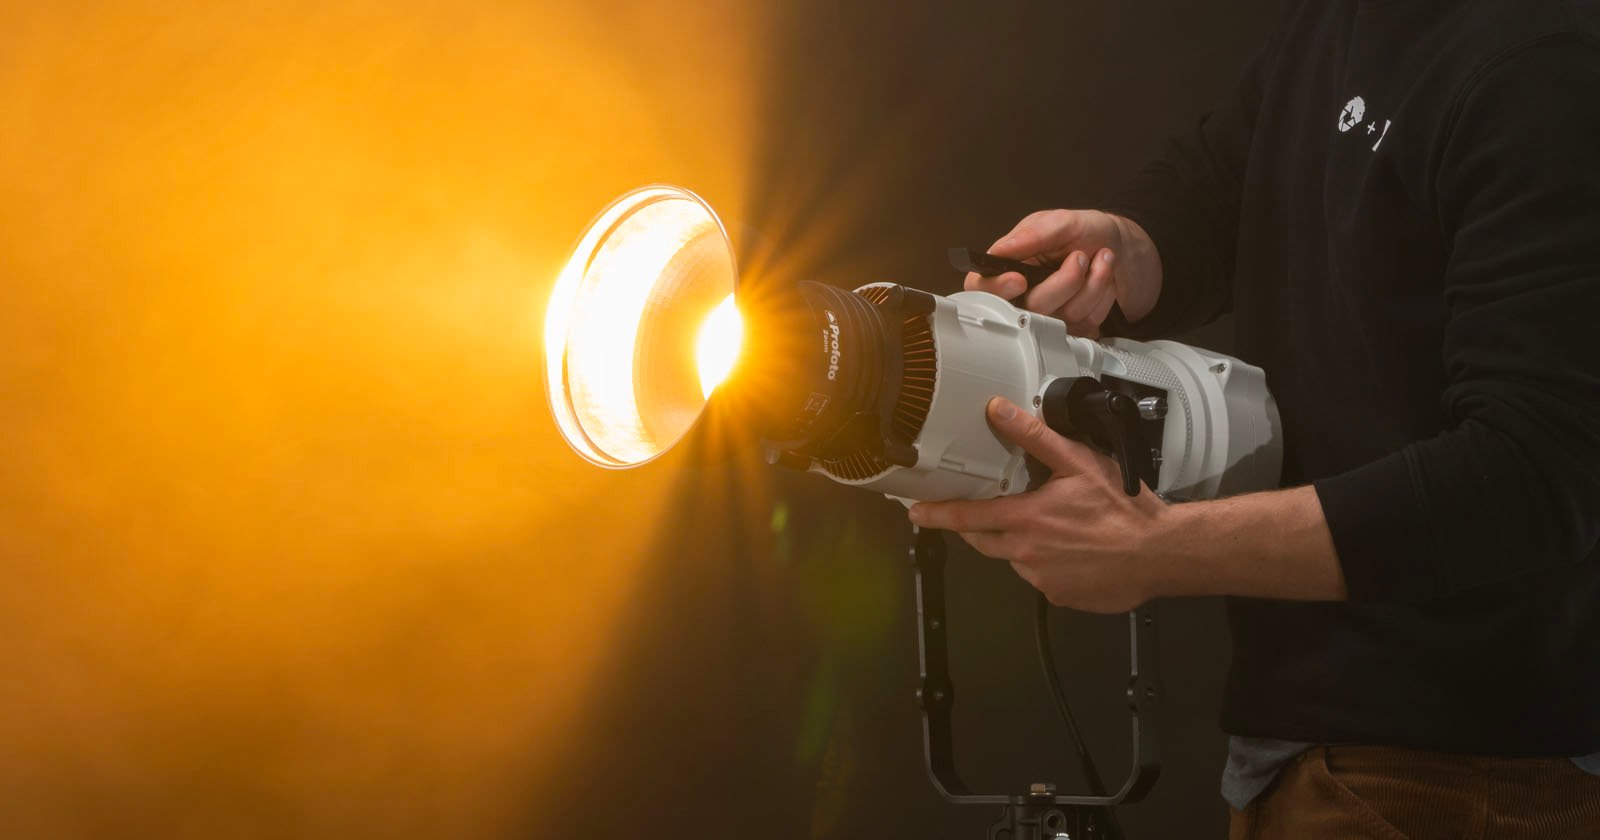 A person holding an LED light with a large attached reflector, aiming a bright light towards the left, in a studio with a warm, orange-hued backdrop.